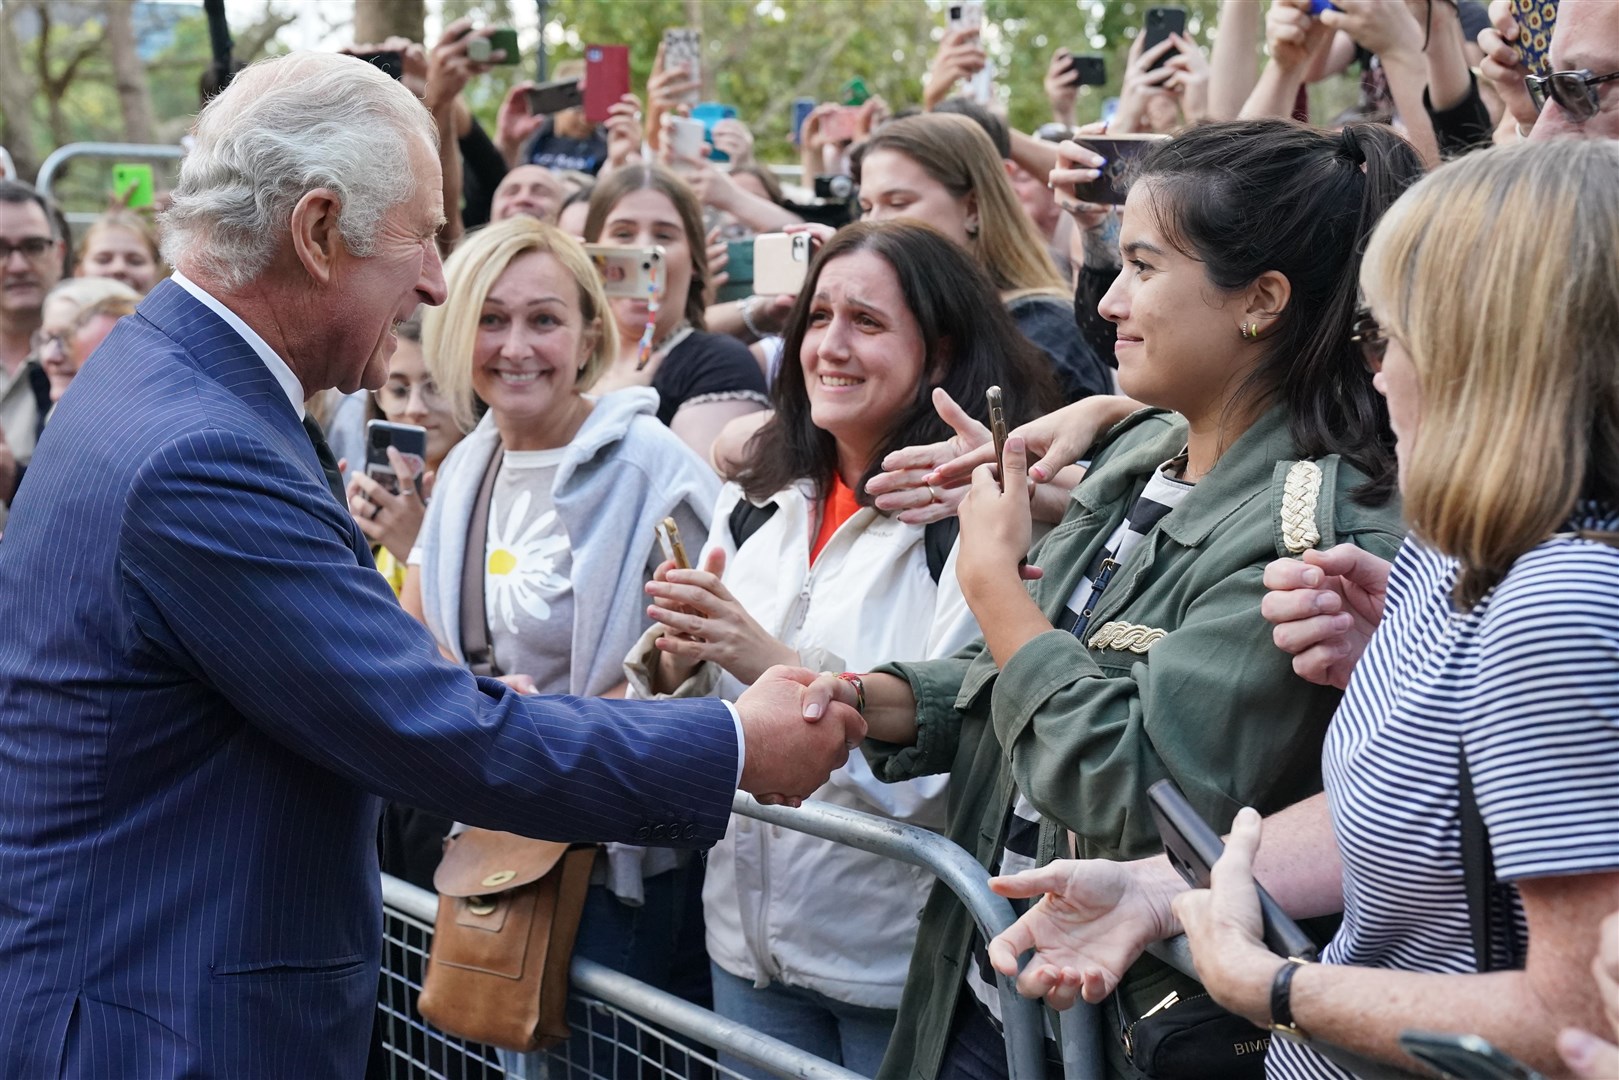 The King meeting well-wishers as he returns to Clarence House from Buckingham Palace (Jonathan Brady/PA)